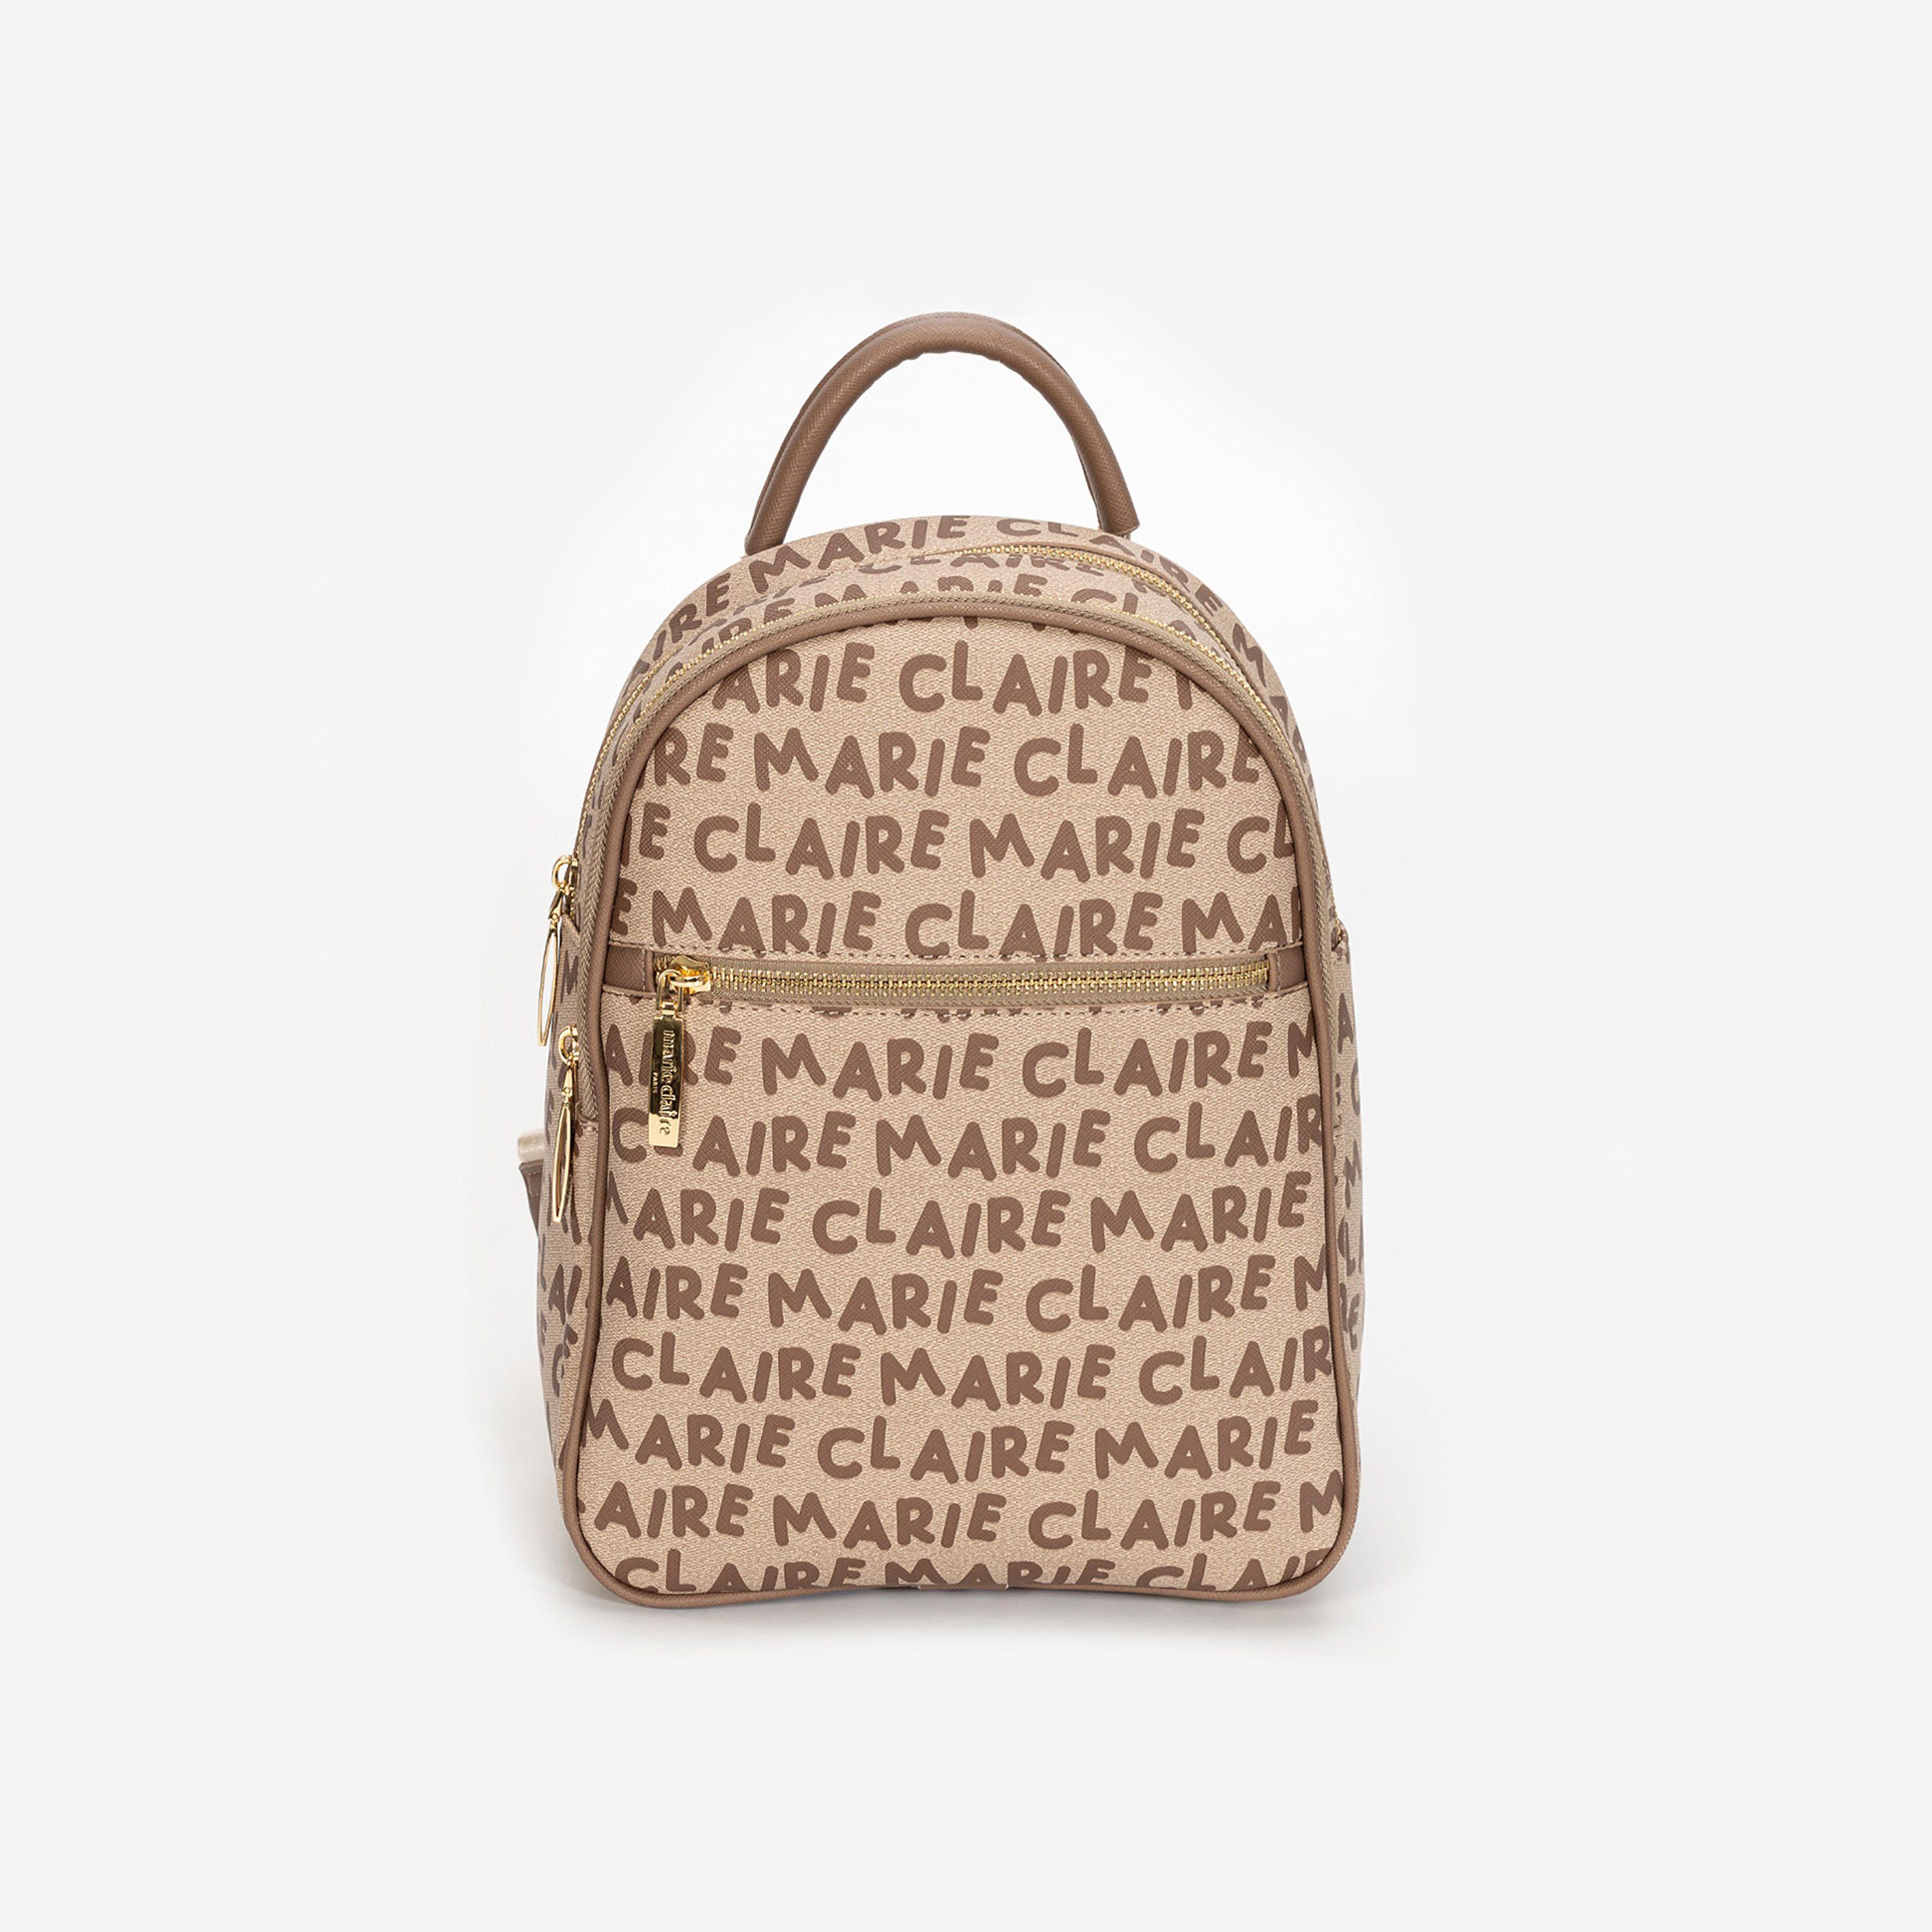 Marie Claire Tote Bag by Tiko Meow | Society6